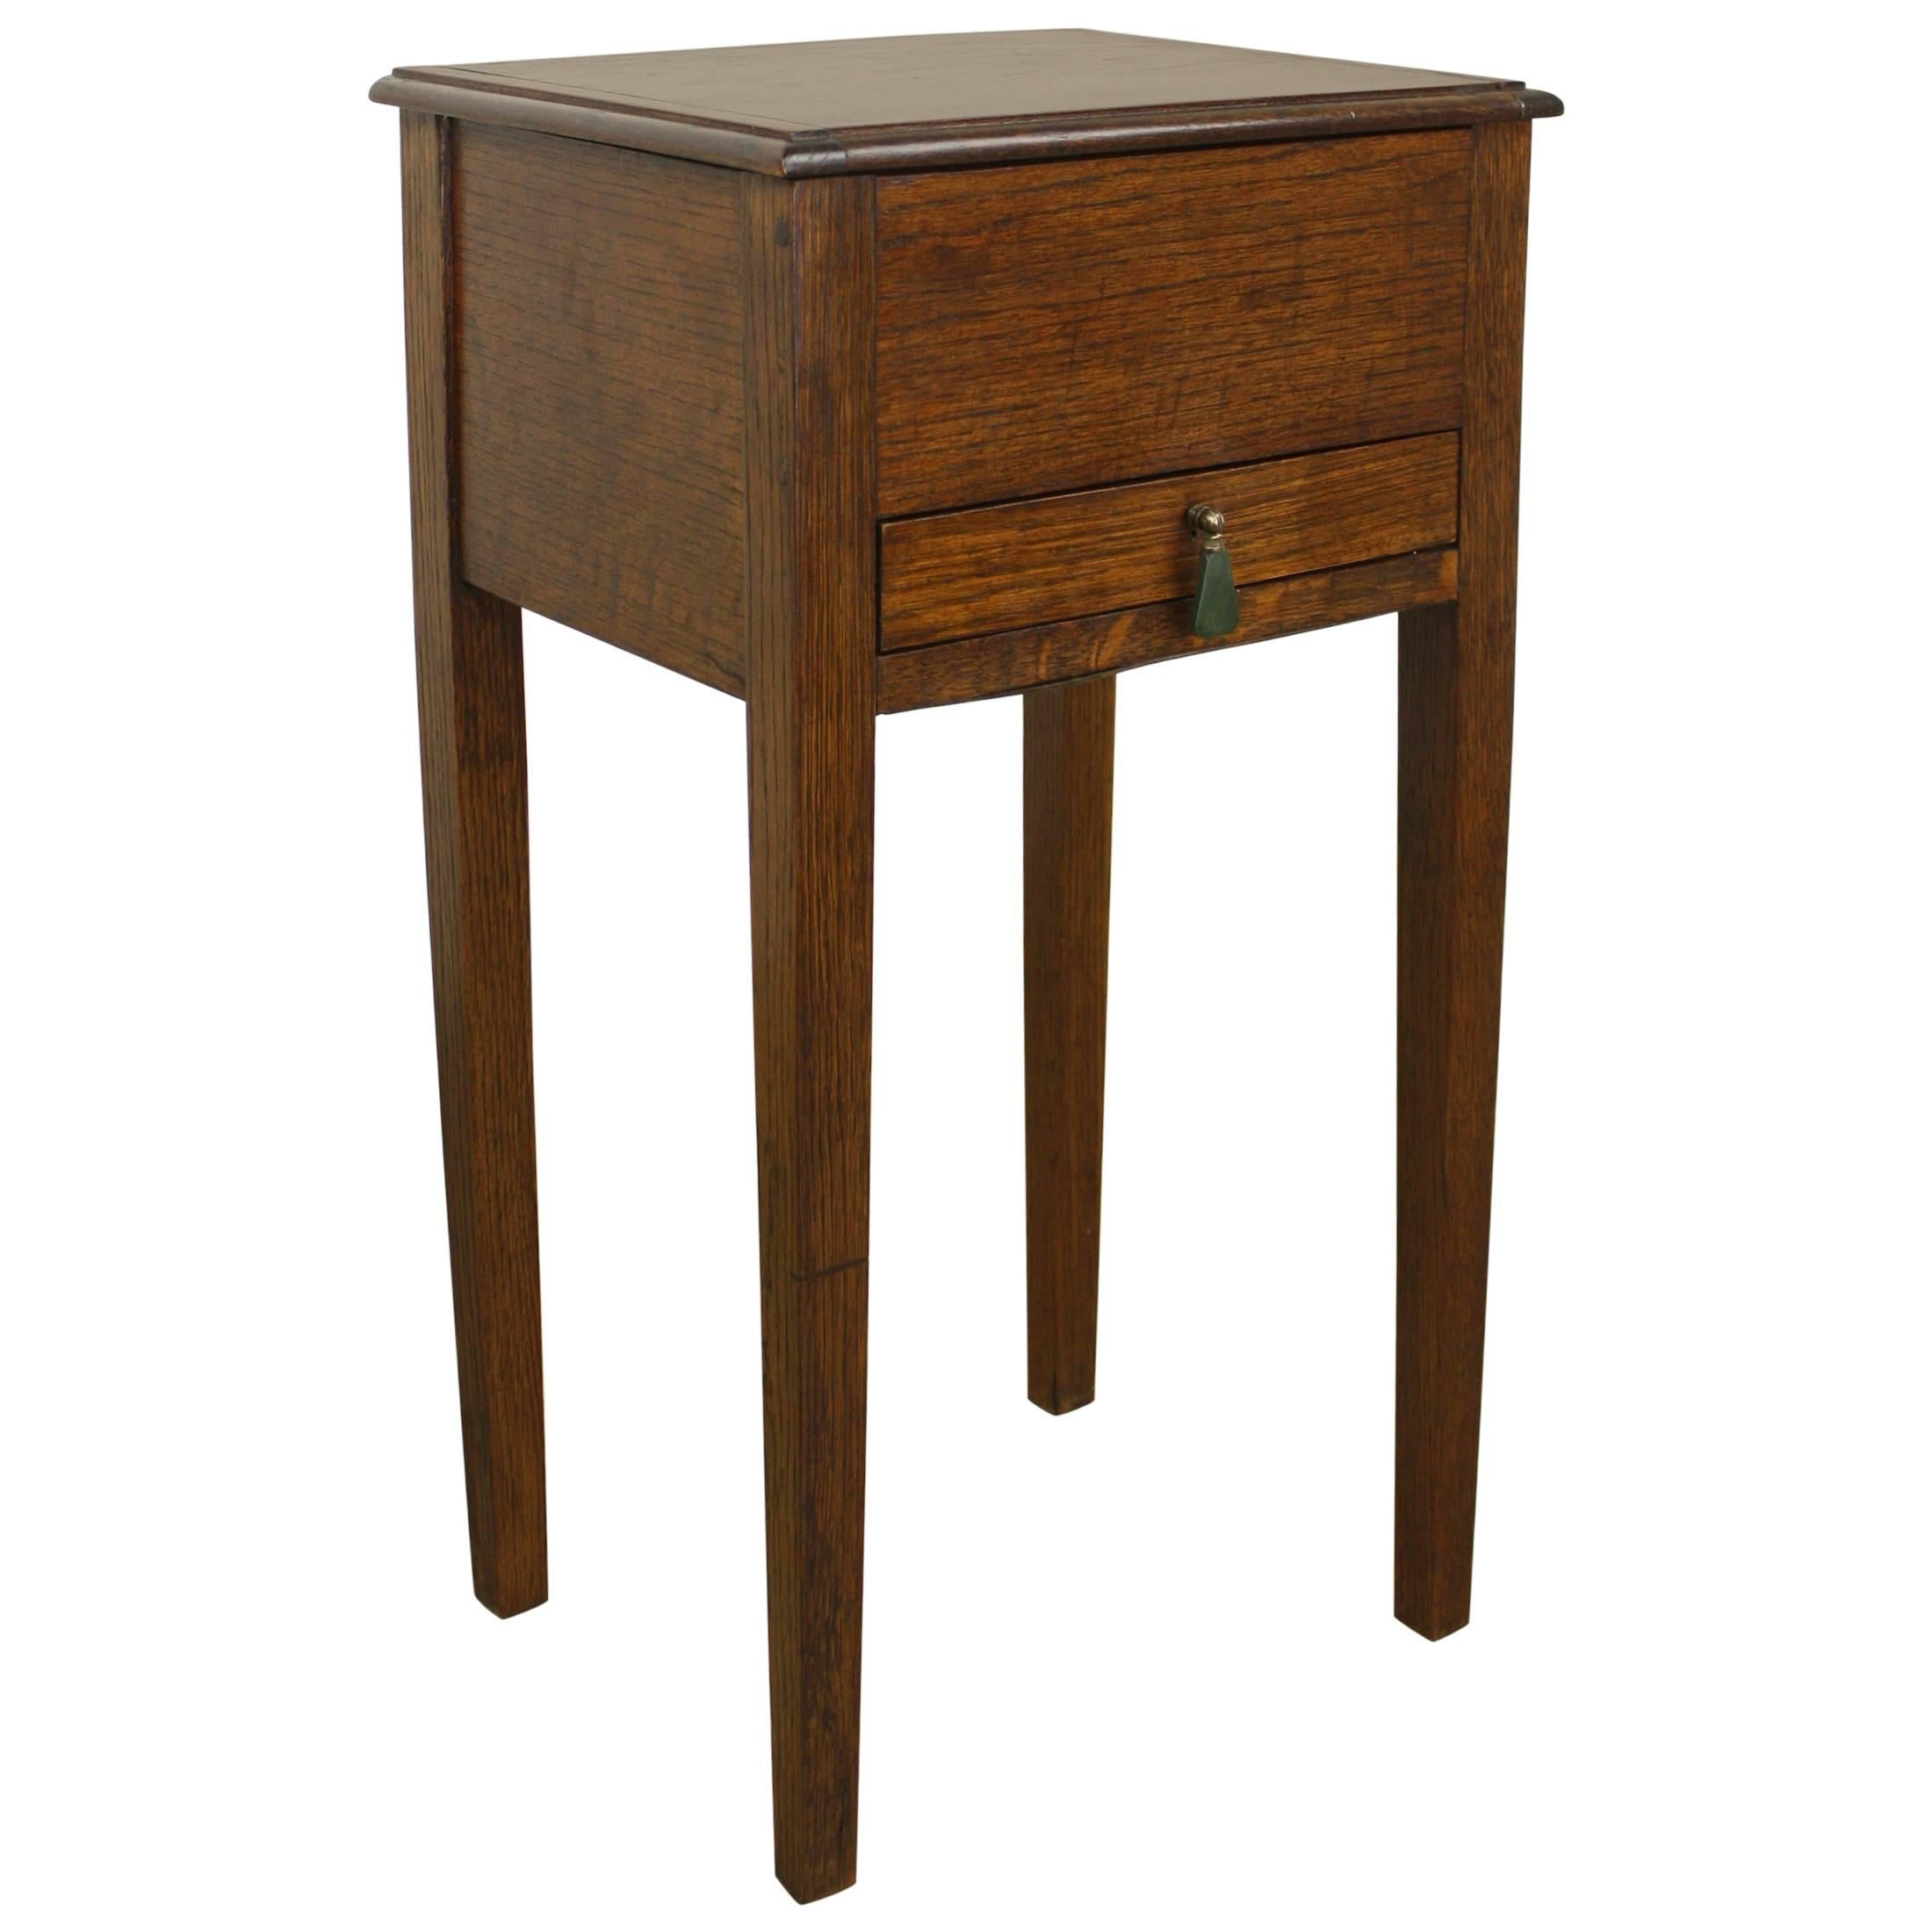 English Arts and Crafts Sewing Box Side Table